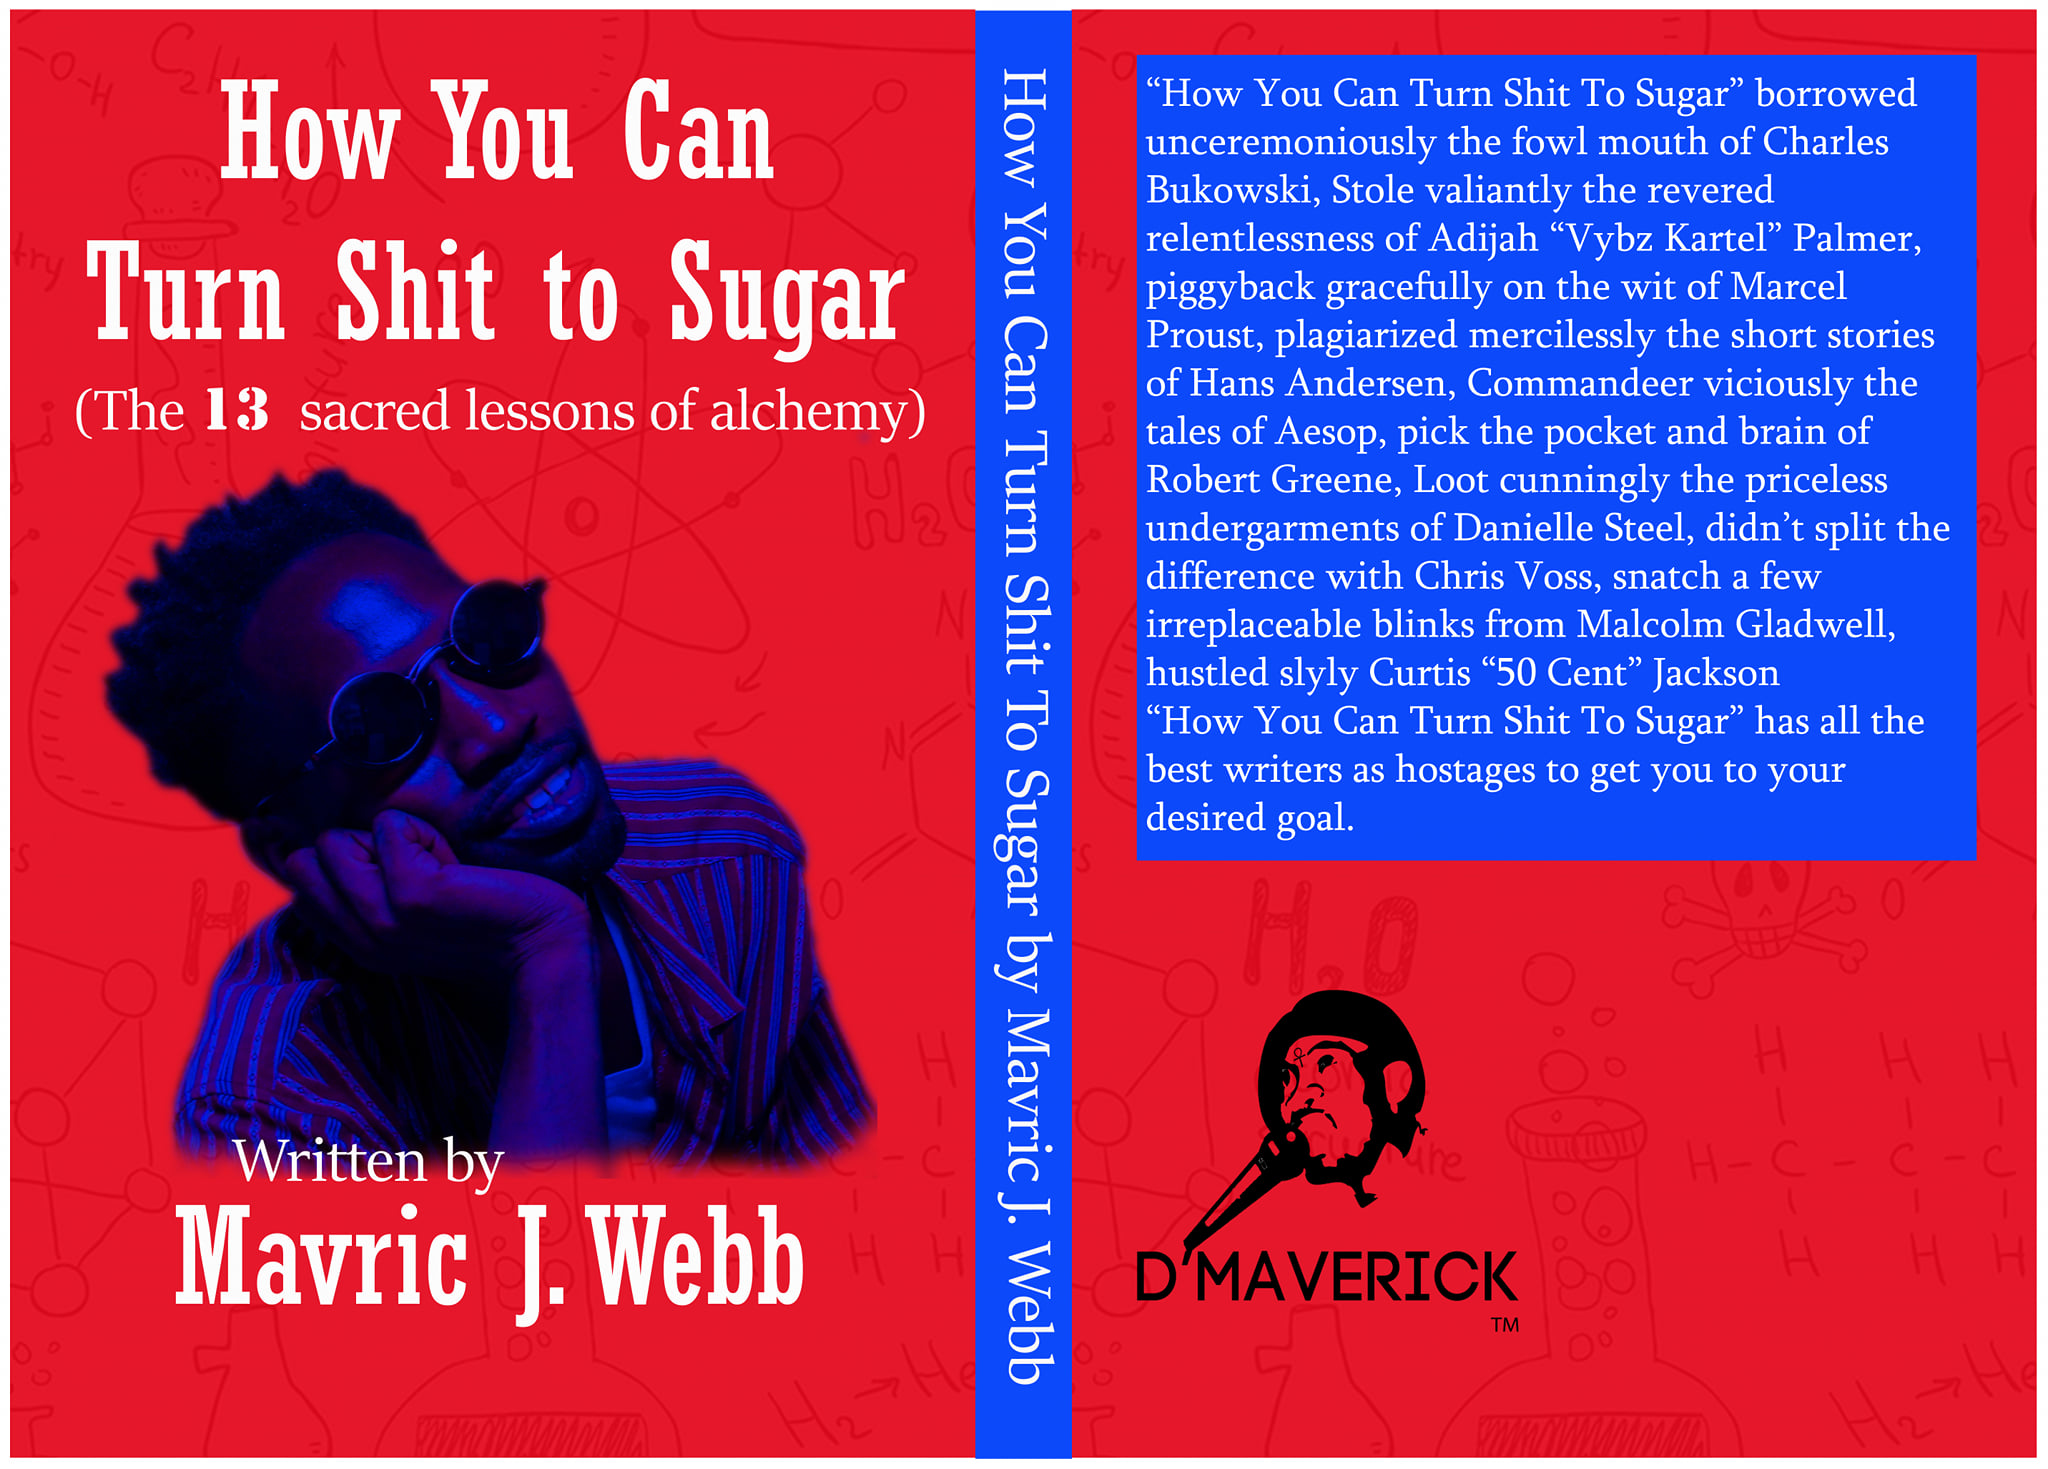 FREE: How You Can Turn Shit To Sugar by Mavric Webb